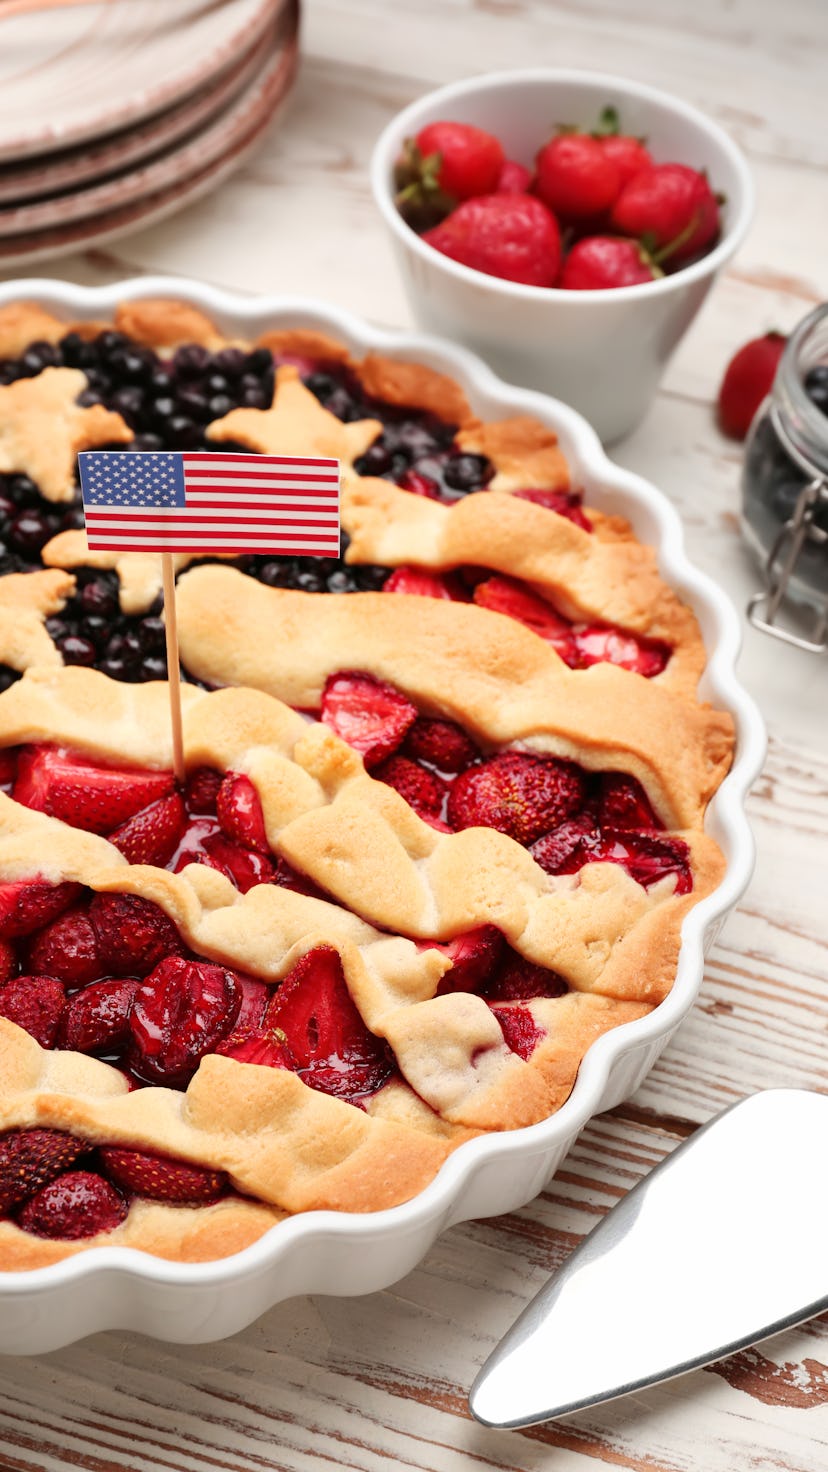 Make these red, white, and blue desserts this 4th of July